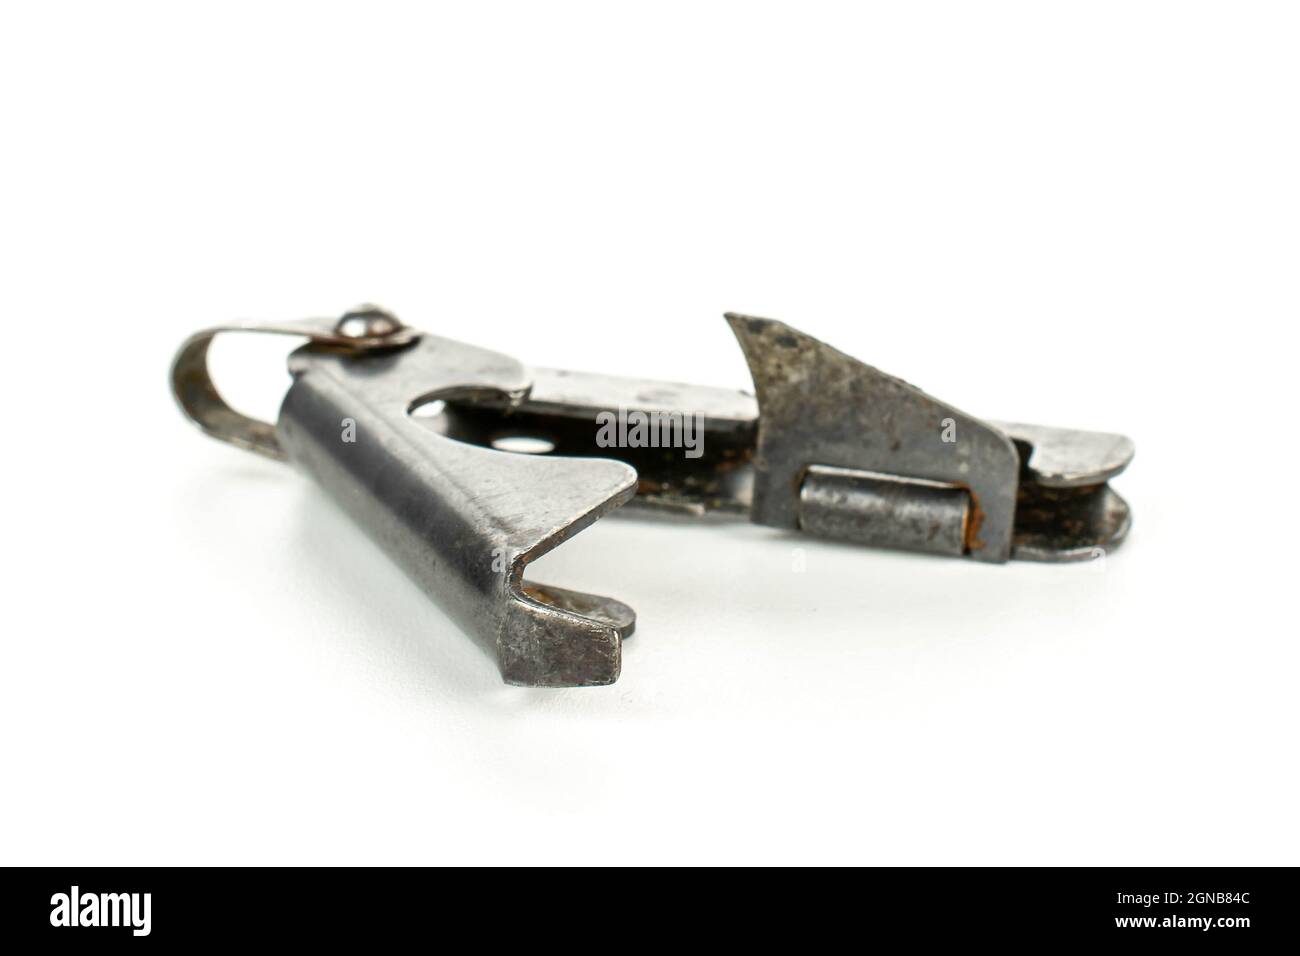 https://c8.alamy.com/comp/2GNB84C/one-old-army-can-opener-isolated-on-white-background-2GNB84C.jpg